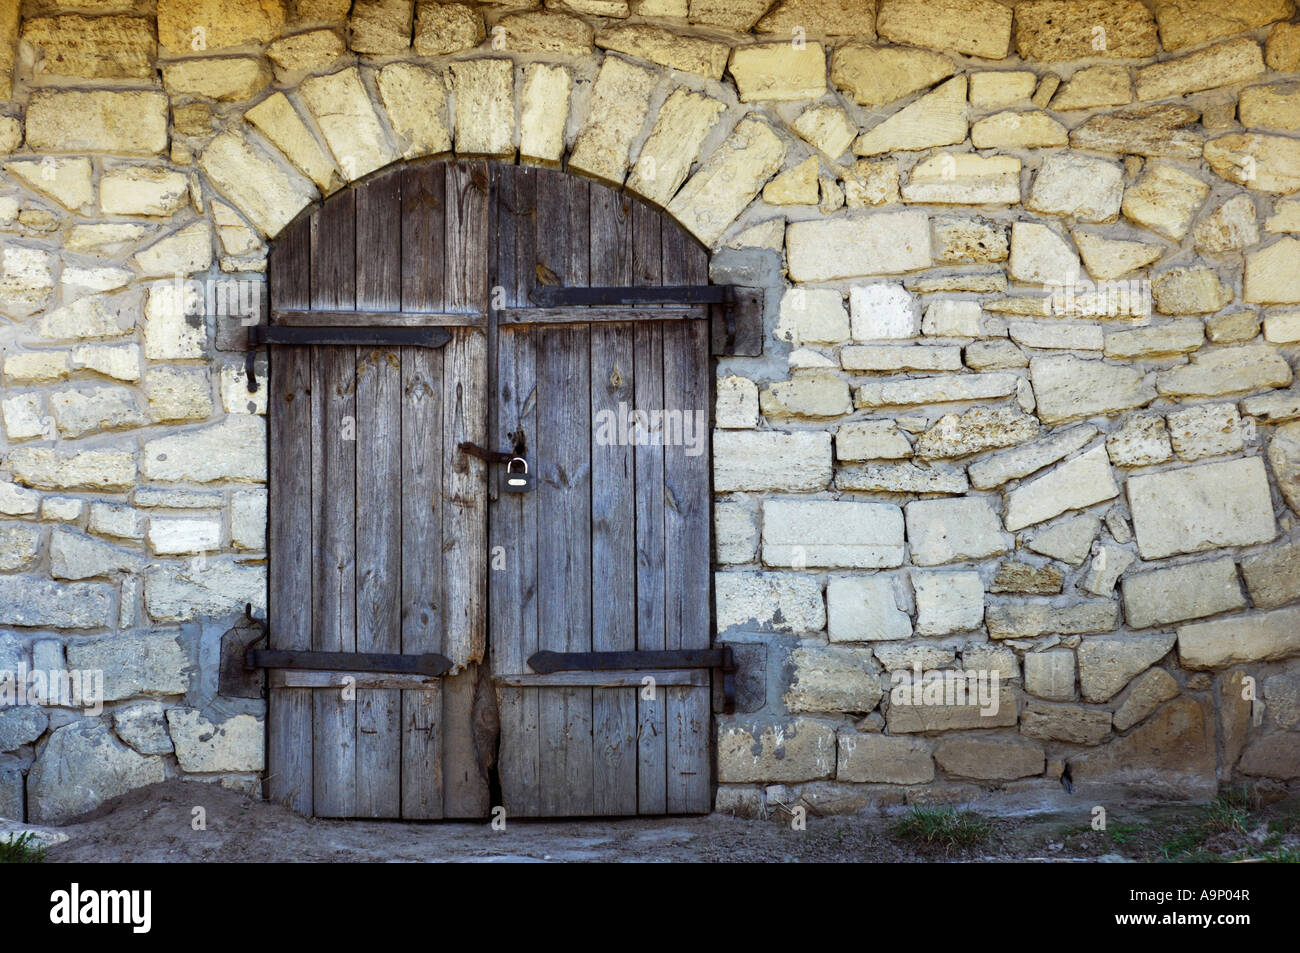 Old stone wall with an arched wooden door texture Stock Photo - Alamy